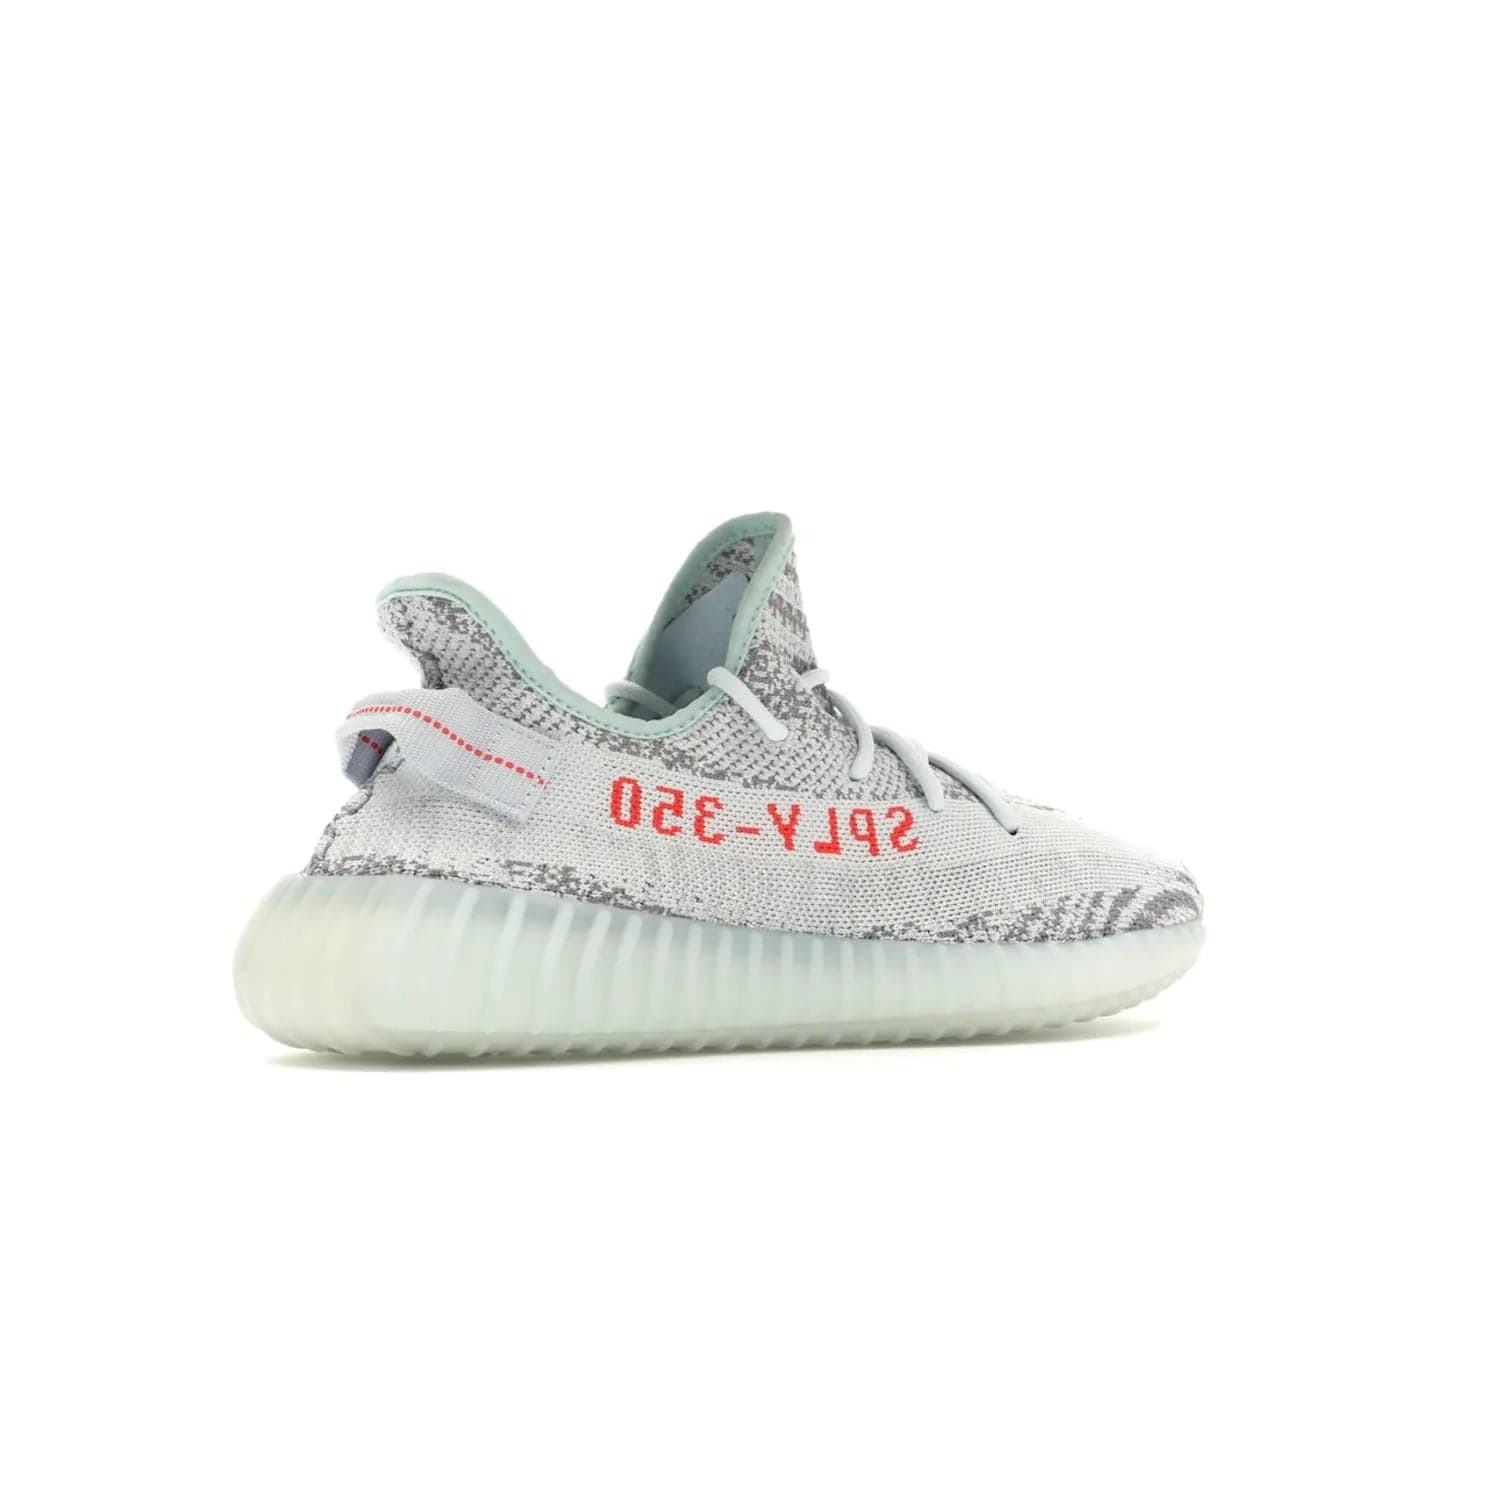 adidas Yeezy Boost 350 V2 Blue Tint - Image 34 - Only at www.BallersClubKickz.com - The adidas Yeezy Boost 350 V2 Blue Tint merges fashion and functionality with its Primeknit upper and Boost sole. Released in December 2017, this luxurious sneaker is perfect for making a stylish statement.